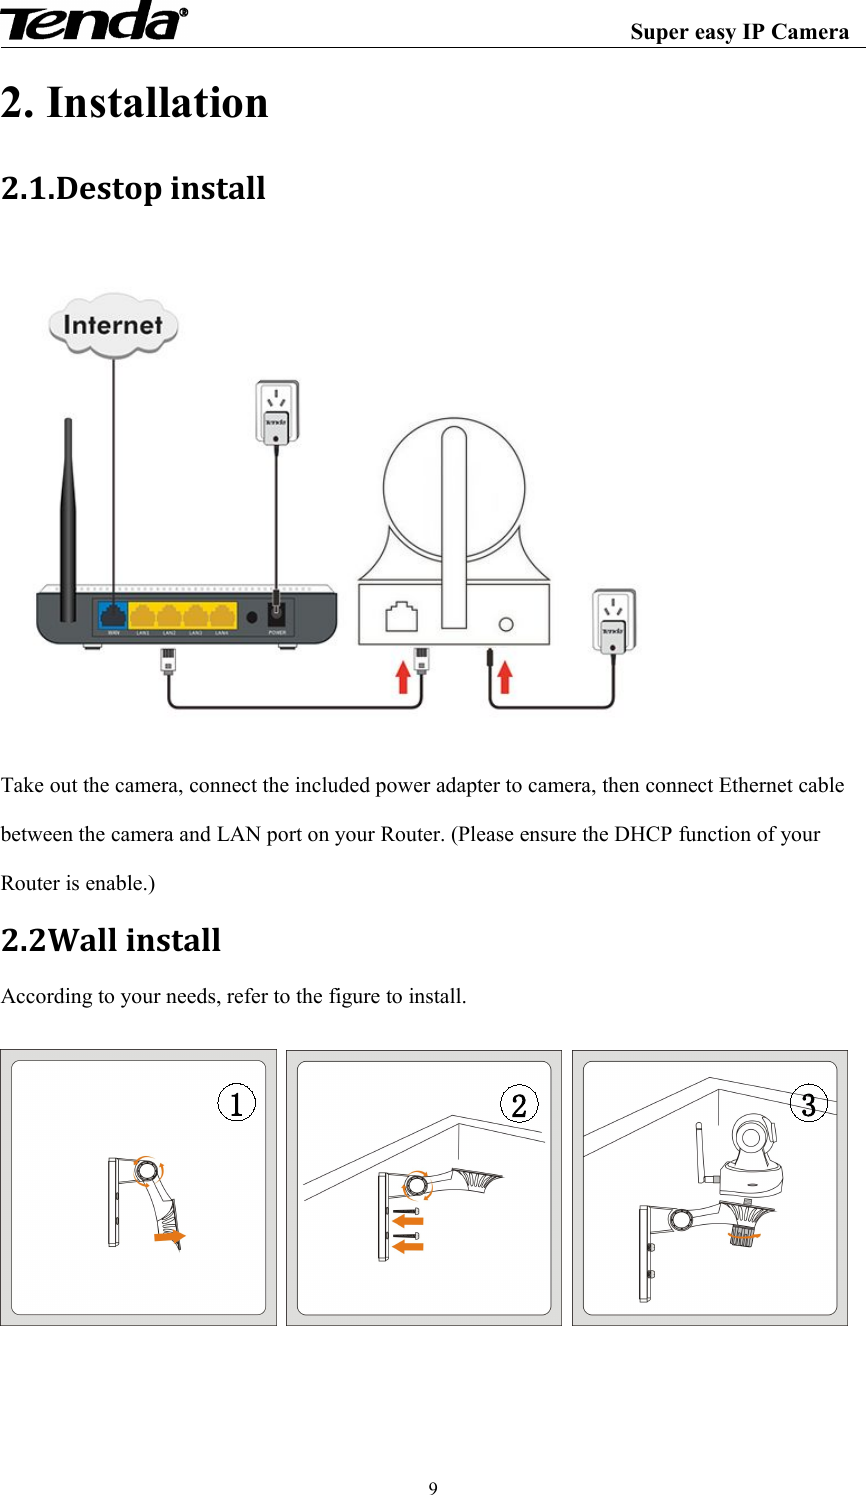 Super easy IP Camera92. Installation2.1.Destop installTake out the camera, connect the included power adapter to camera, then connect Ethernet cablebetween the camera and LAN port on your Router. (Please ensure the DHCP function of yourRouter is enable.)2.2Wall installAccording to your needs, refer to the figure to install.321